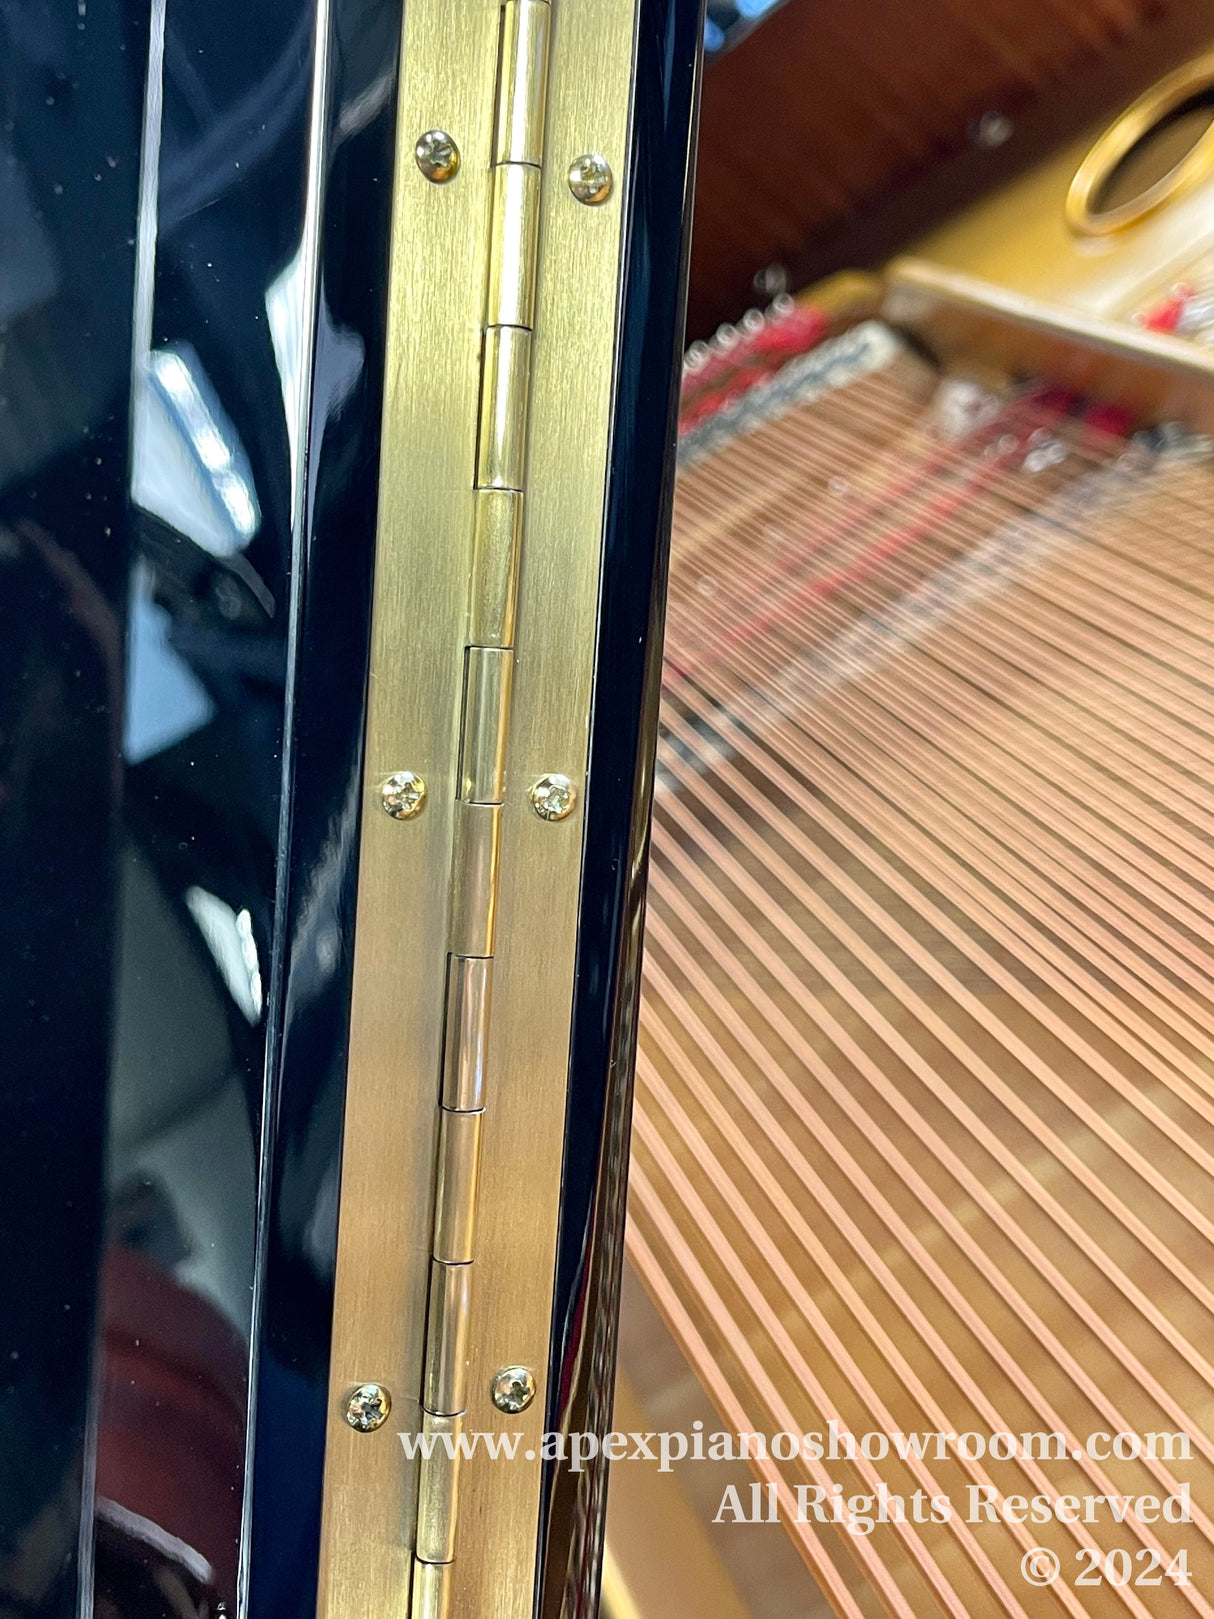 Close-up of a pianos gold-colored hinge on a high-gloss black finish, with strings and tuning pins visible in the background, showcasing the craftsmanship of the pianos hardware and structure.